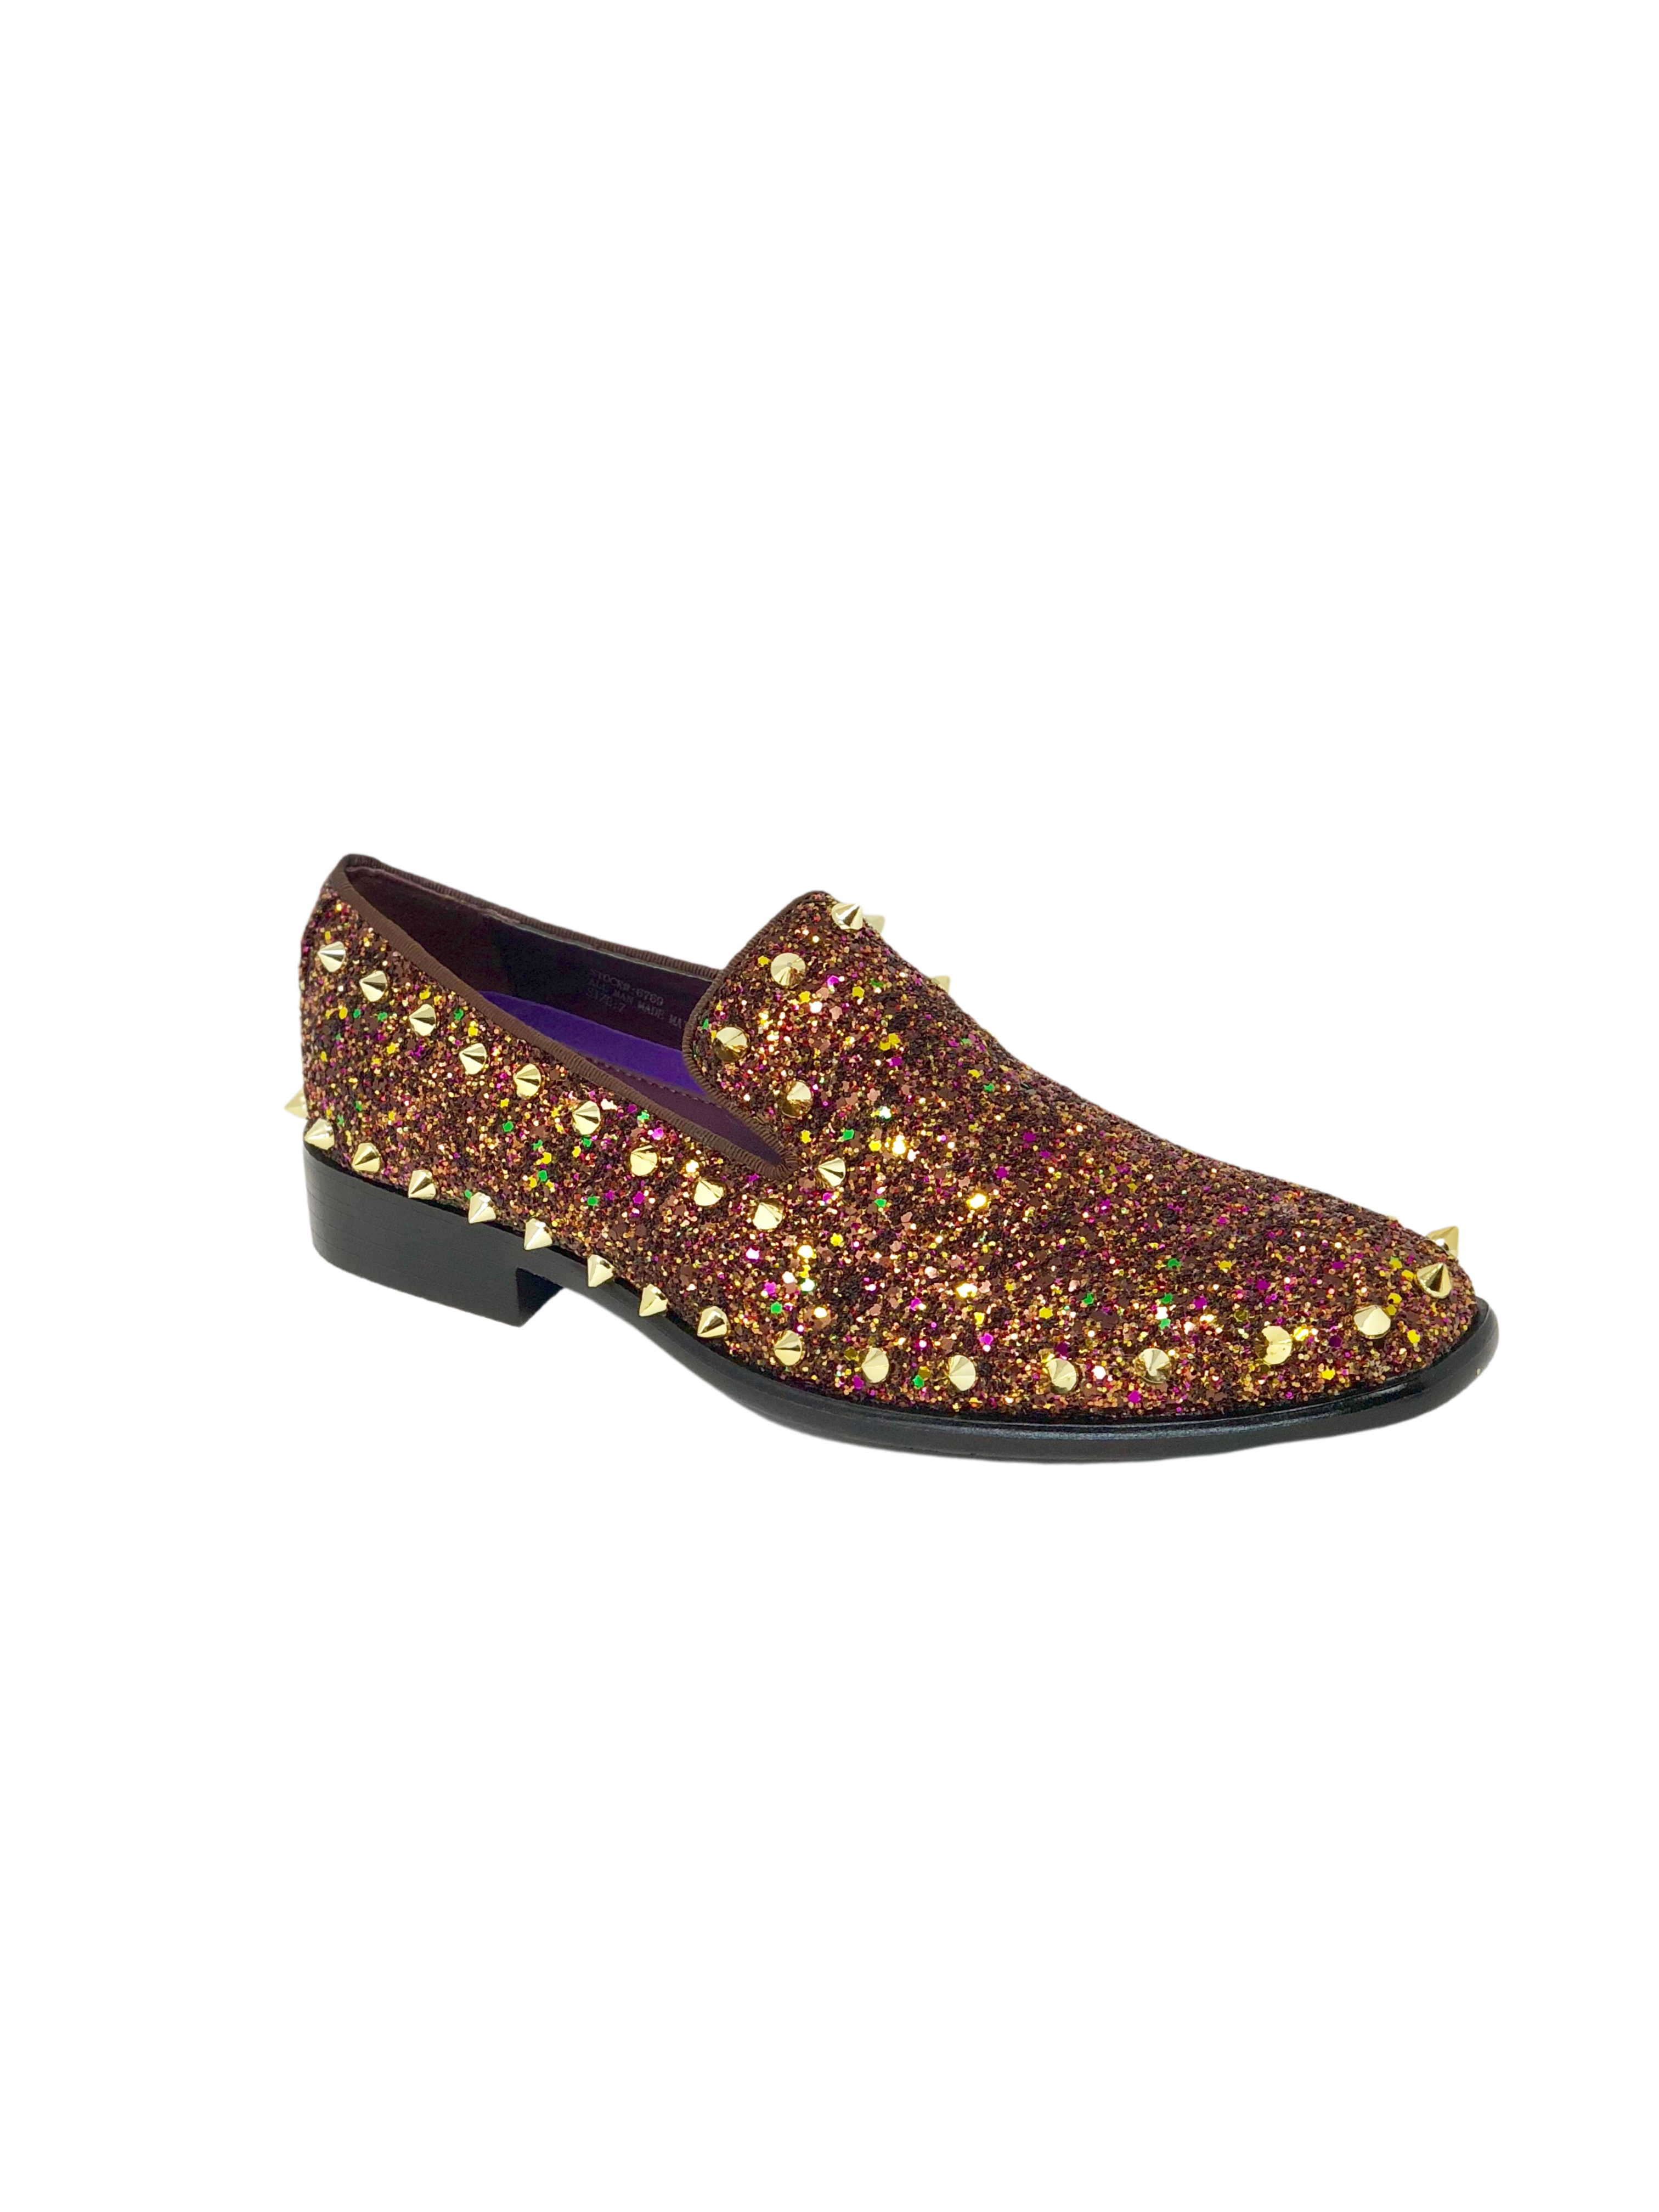 After Midnight Bronze multi colored shoe with gold spikes